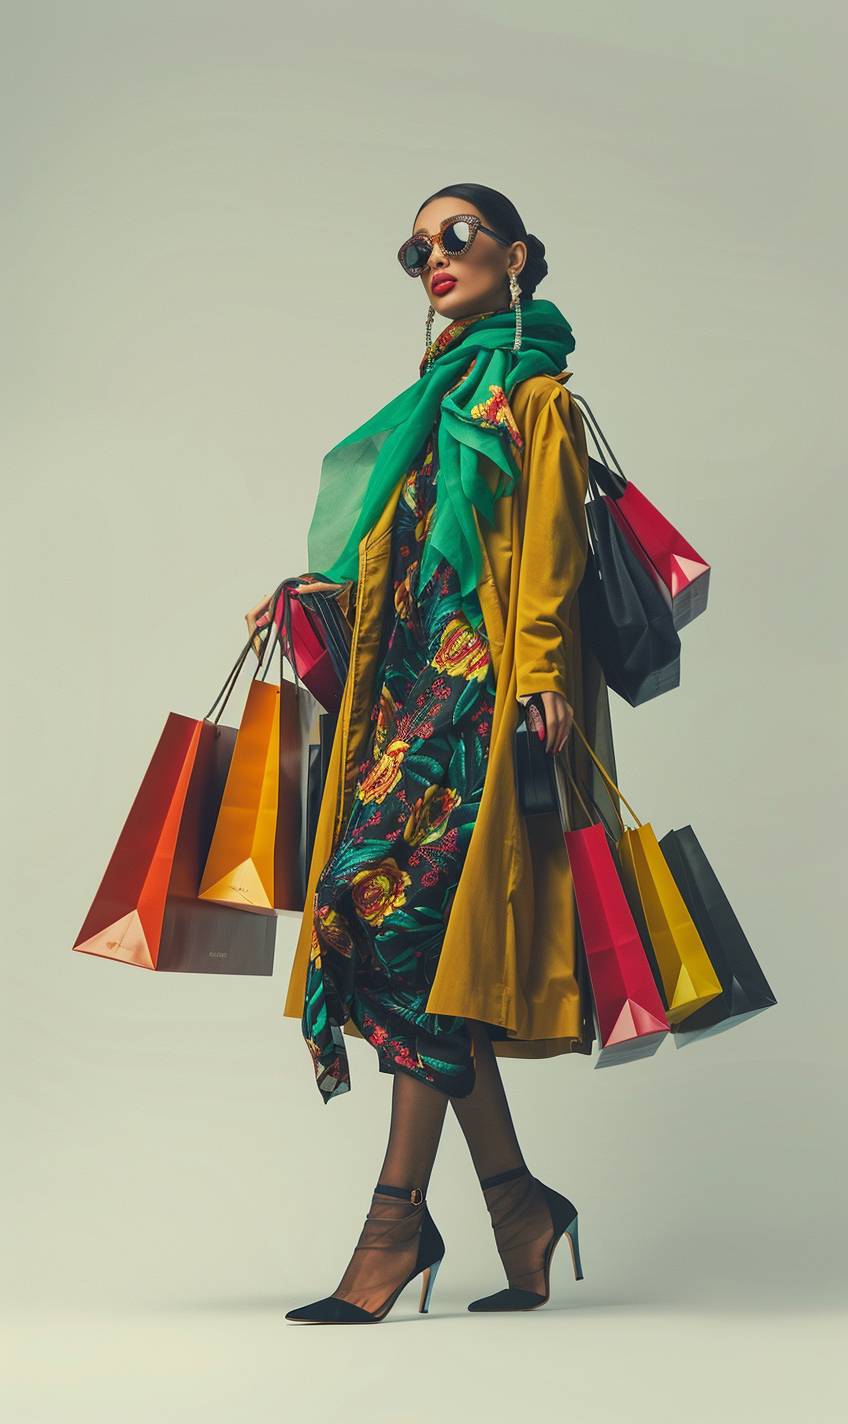 A hero image showing a glamorous, fashion-forward woman as a shopping addict. She is standing full, high heels and carrying an array of shopping bags, dressed in stylish and elegant clothing. The background is solid and minimalistic, ensuring plenty of space for text. Shot with a wide-angle lens to capture the entire scene.